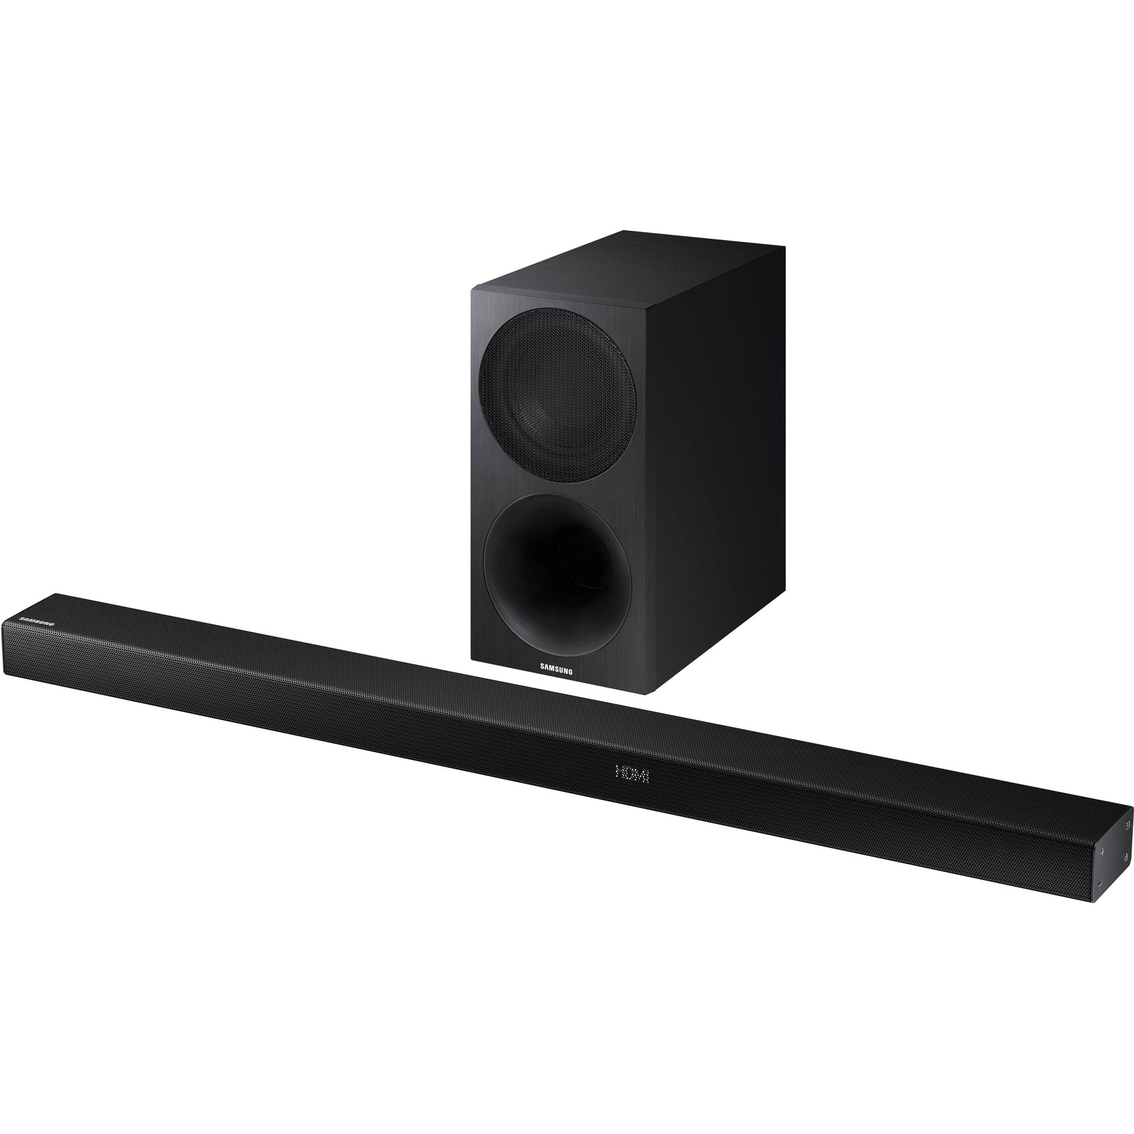 Samsung 3.1-Channel Soundbar System with Wireless Subwoofer - Image 2 of 4